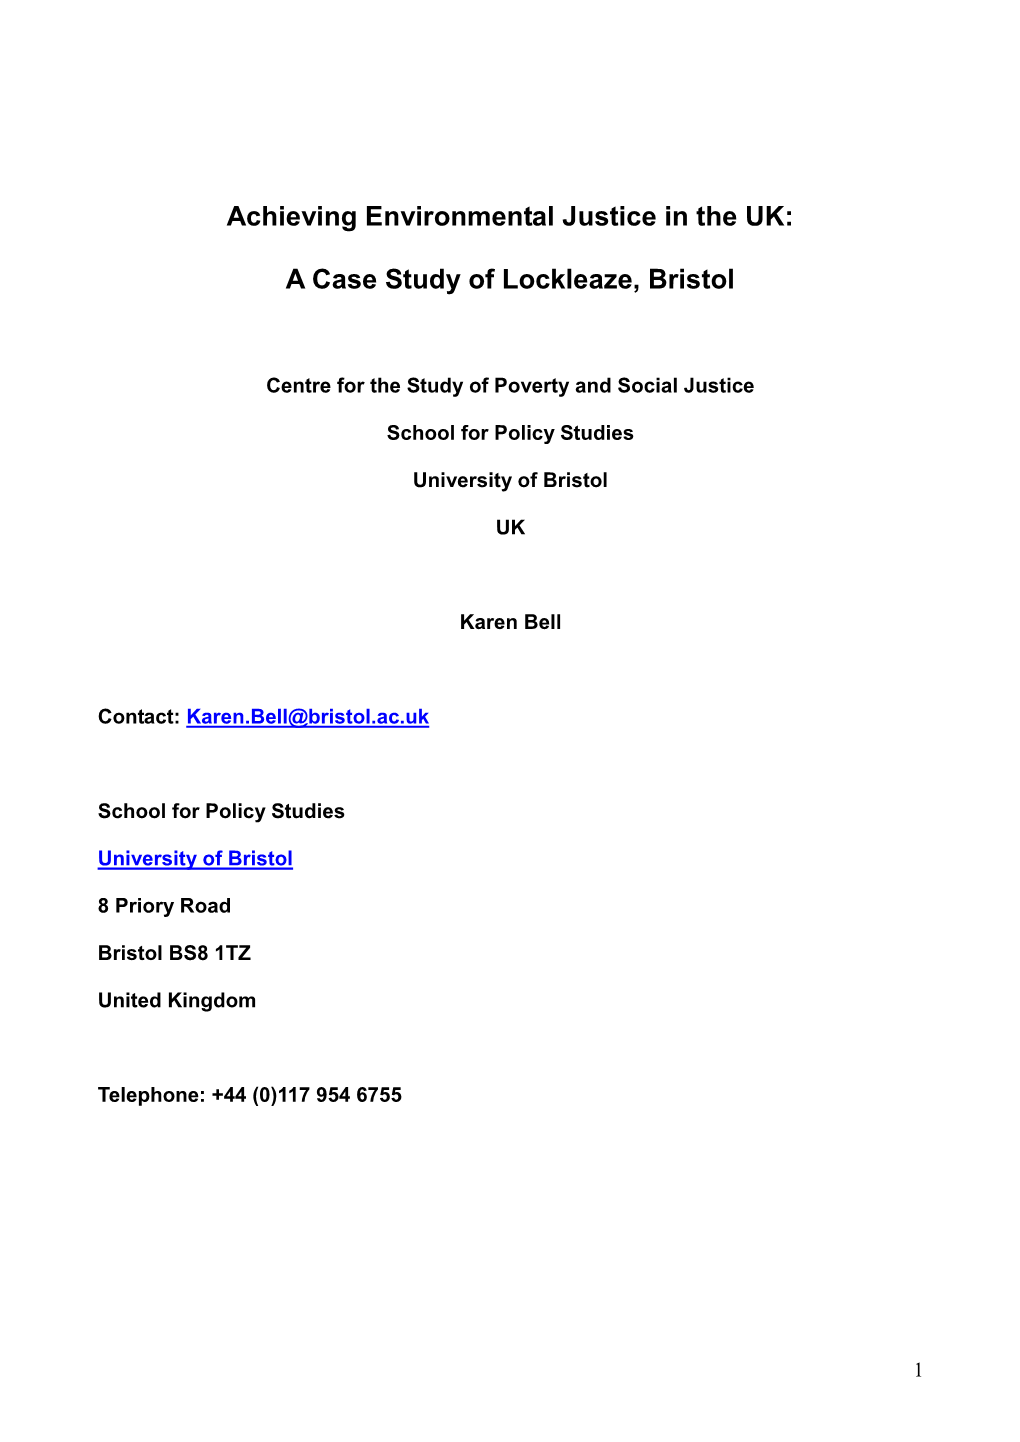 Achieving Environmental Justice in the UK: a Case Study of Lockleaze